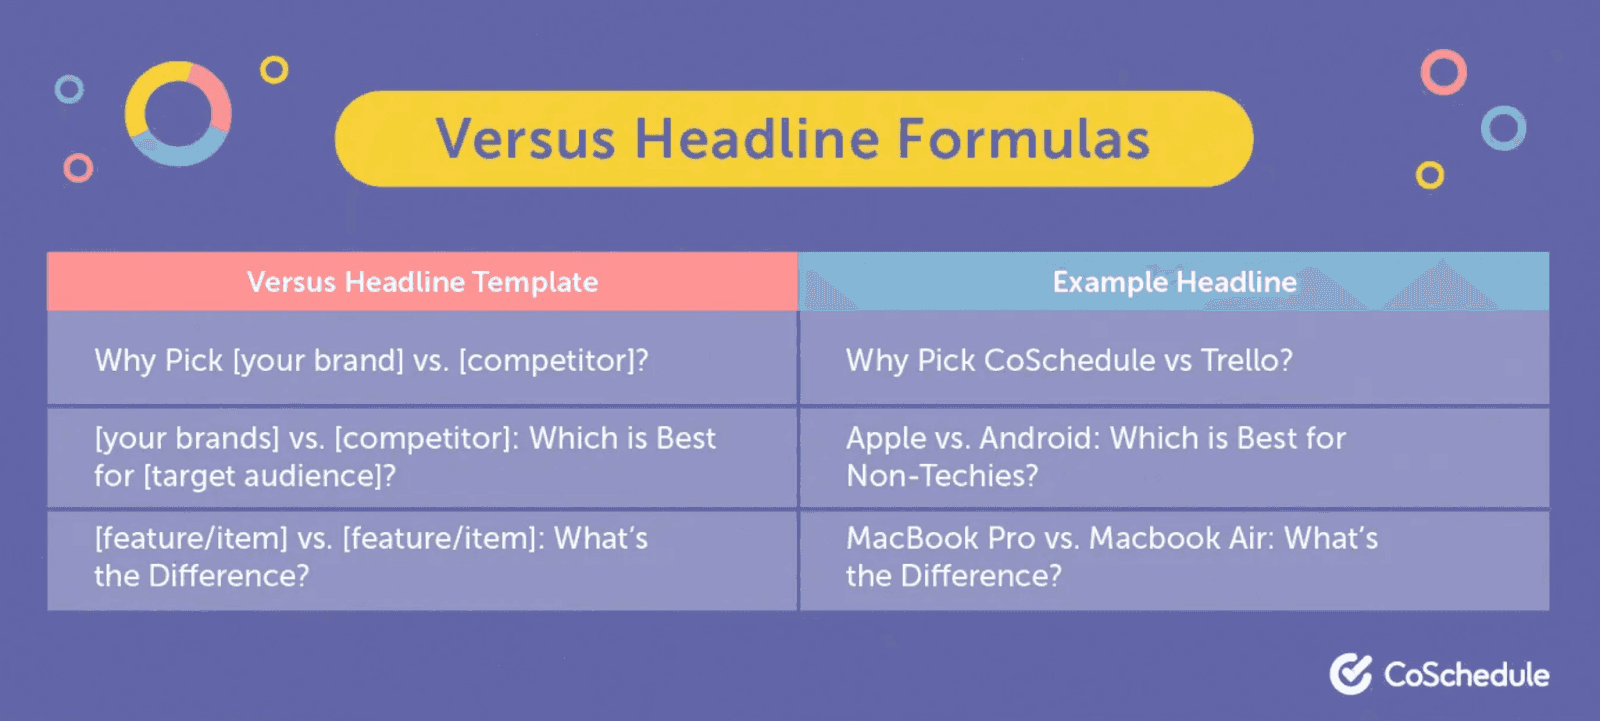 Template for using different forms of versus headlines